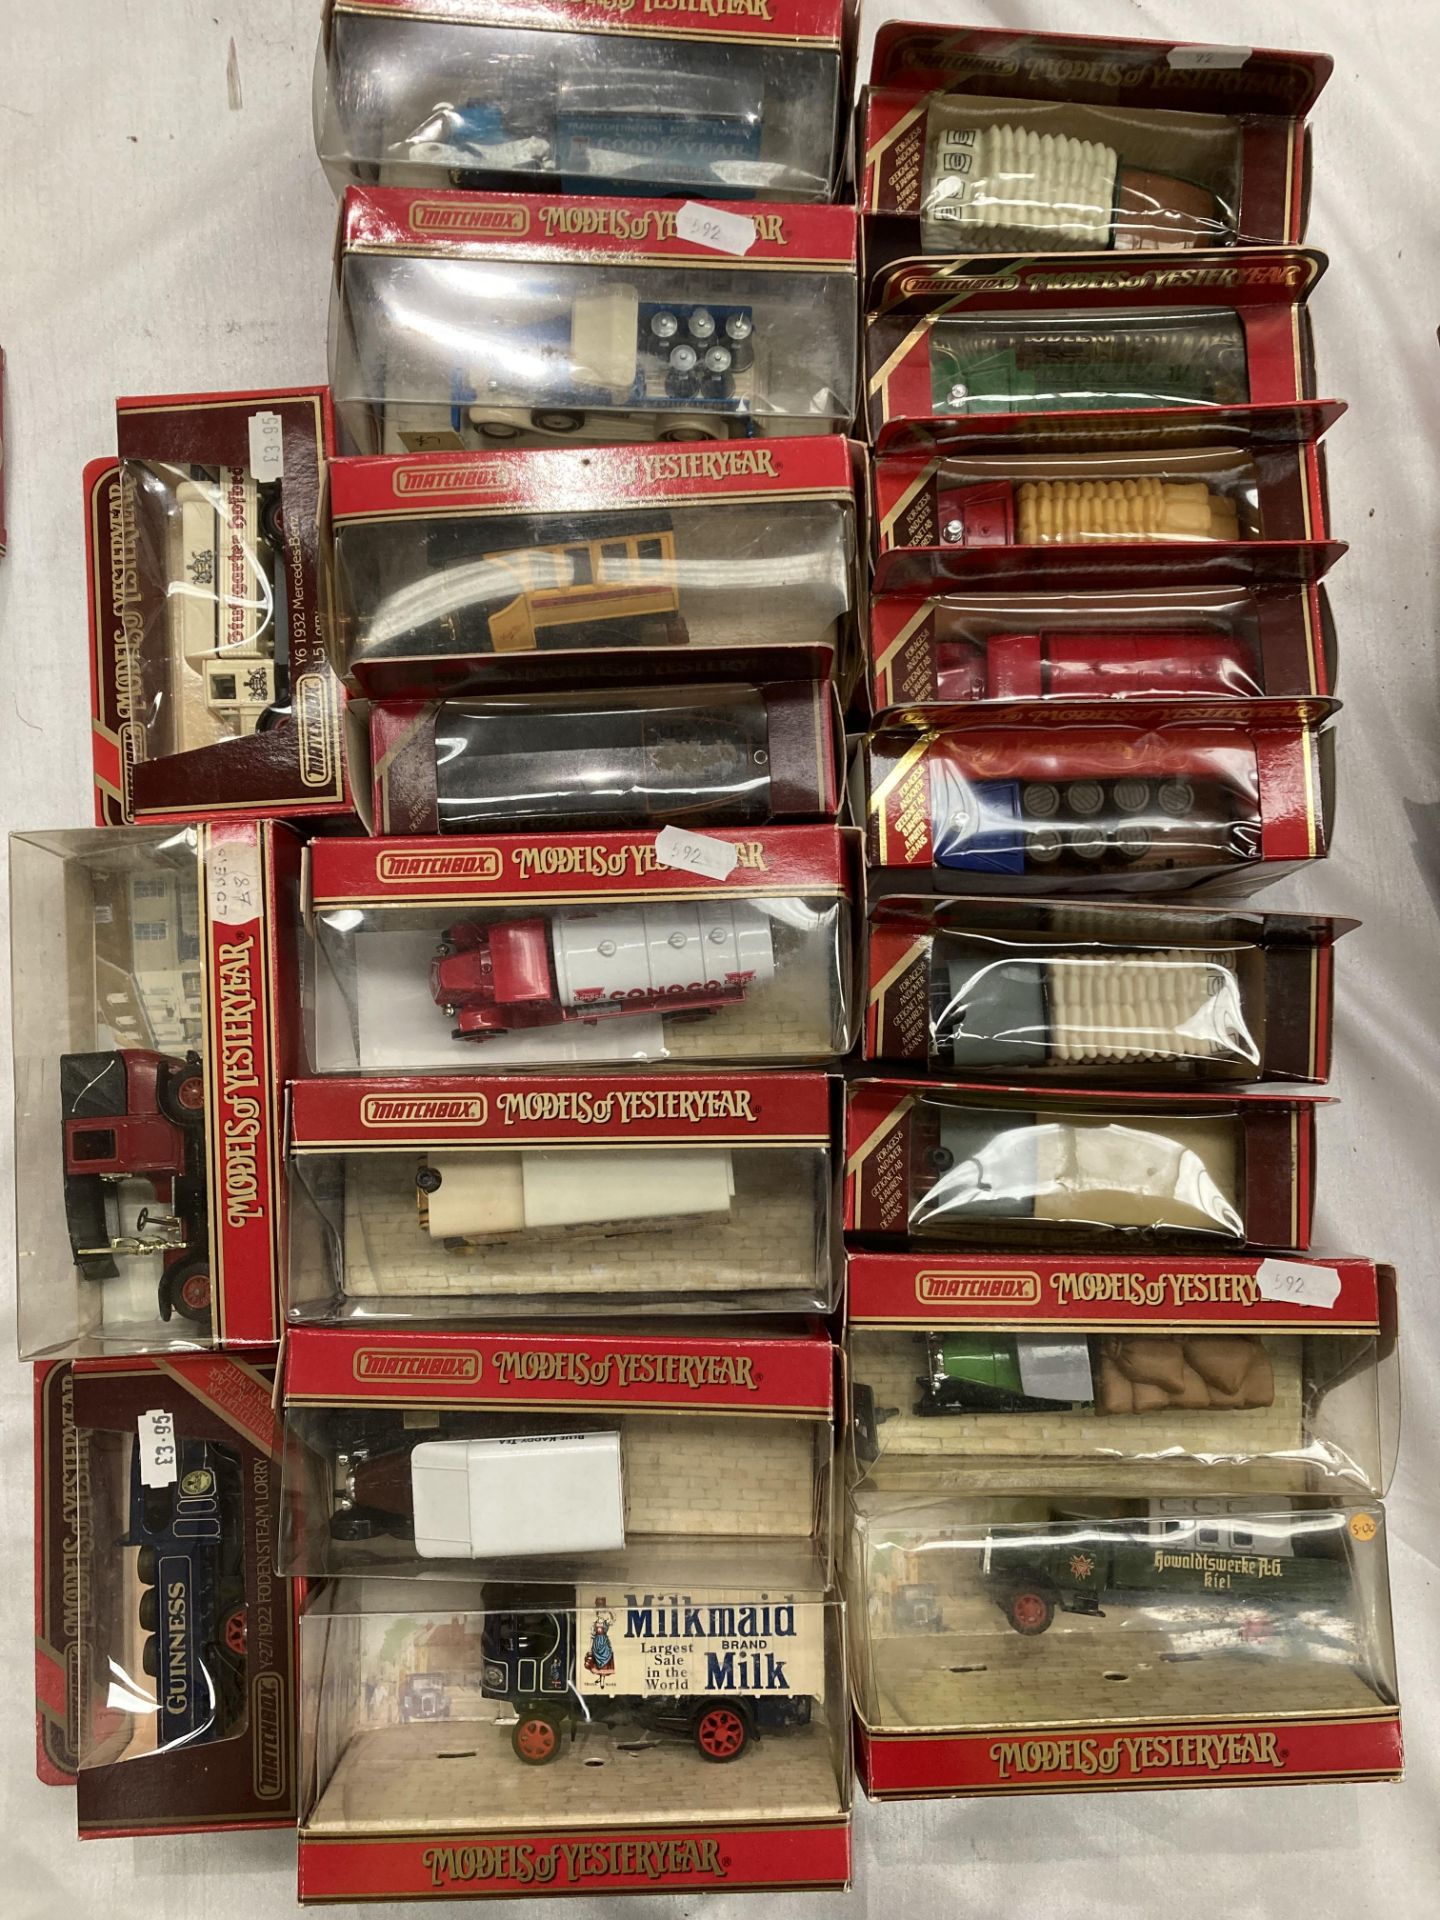 Twenty assorted Matchbox Models of Yesteryear boxed vehicles, Unic taxi,